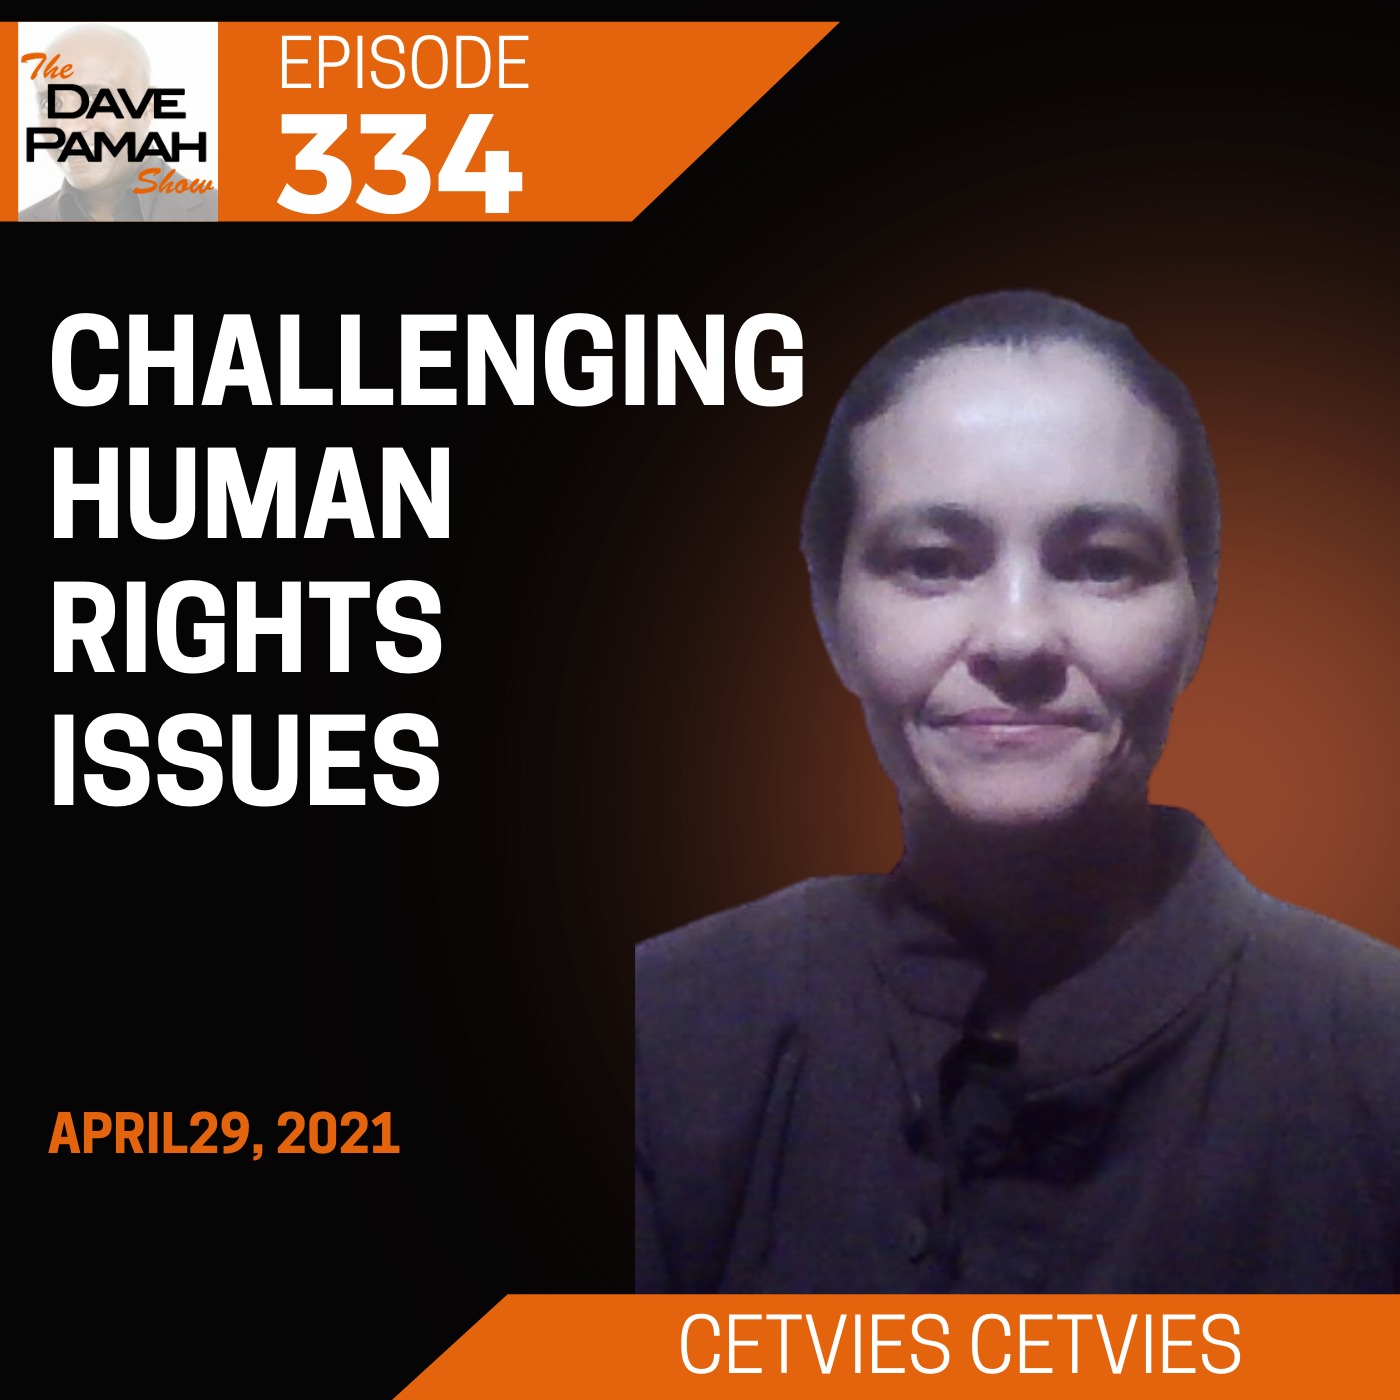 Challenging human rights issues with Cetvies Cetvies